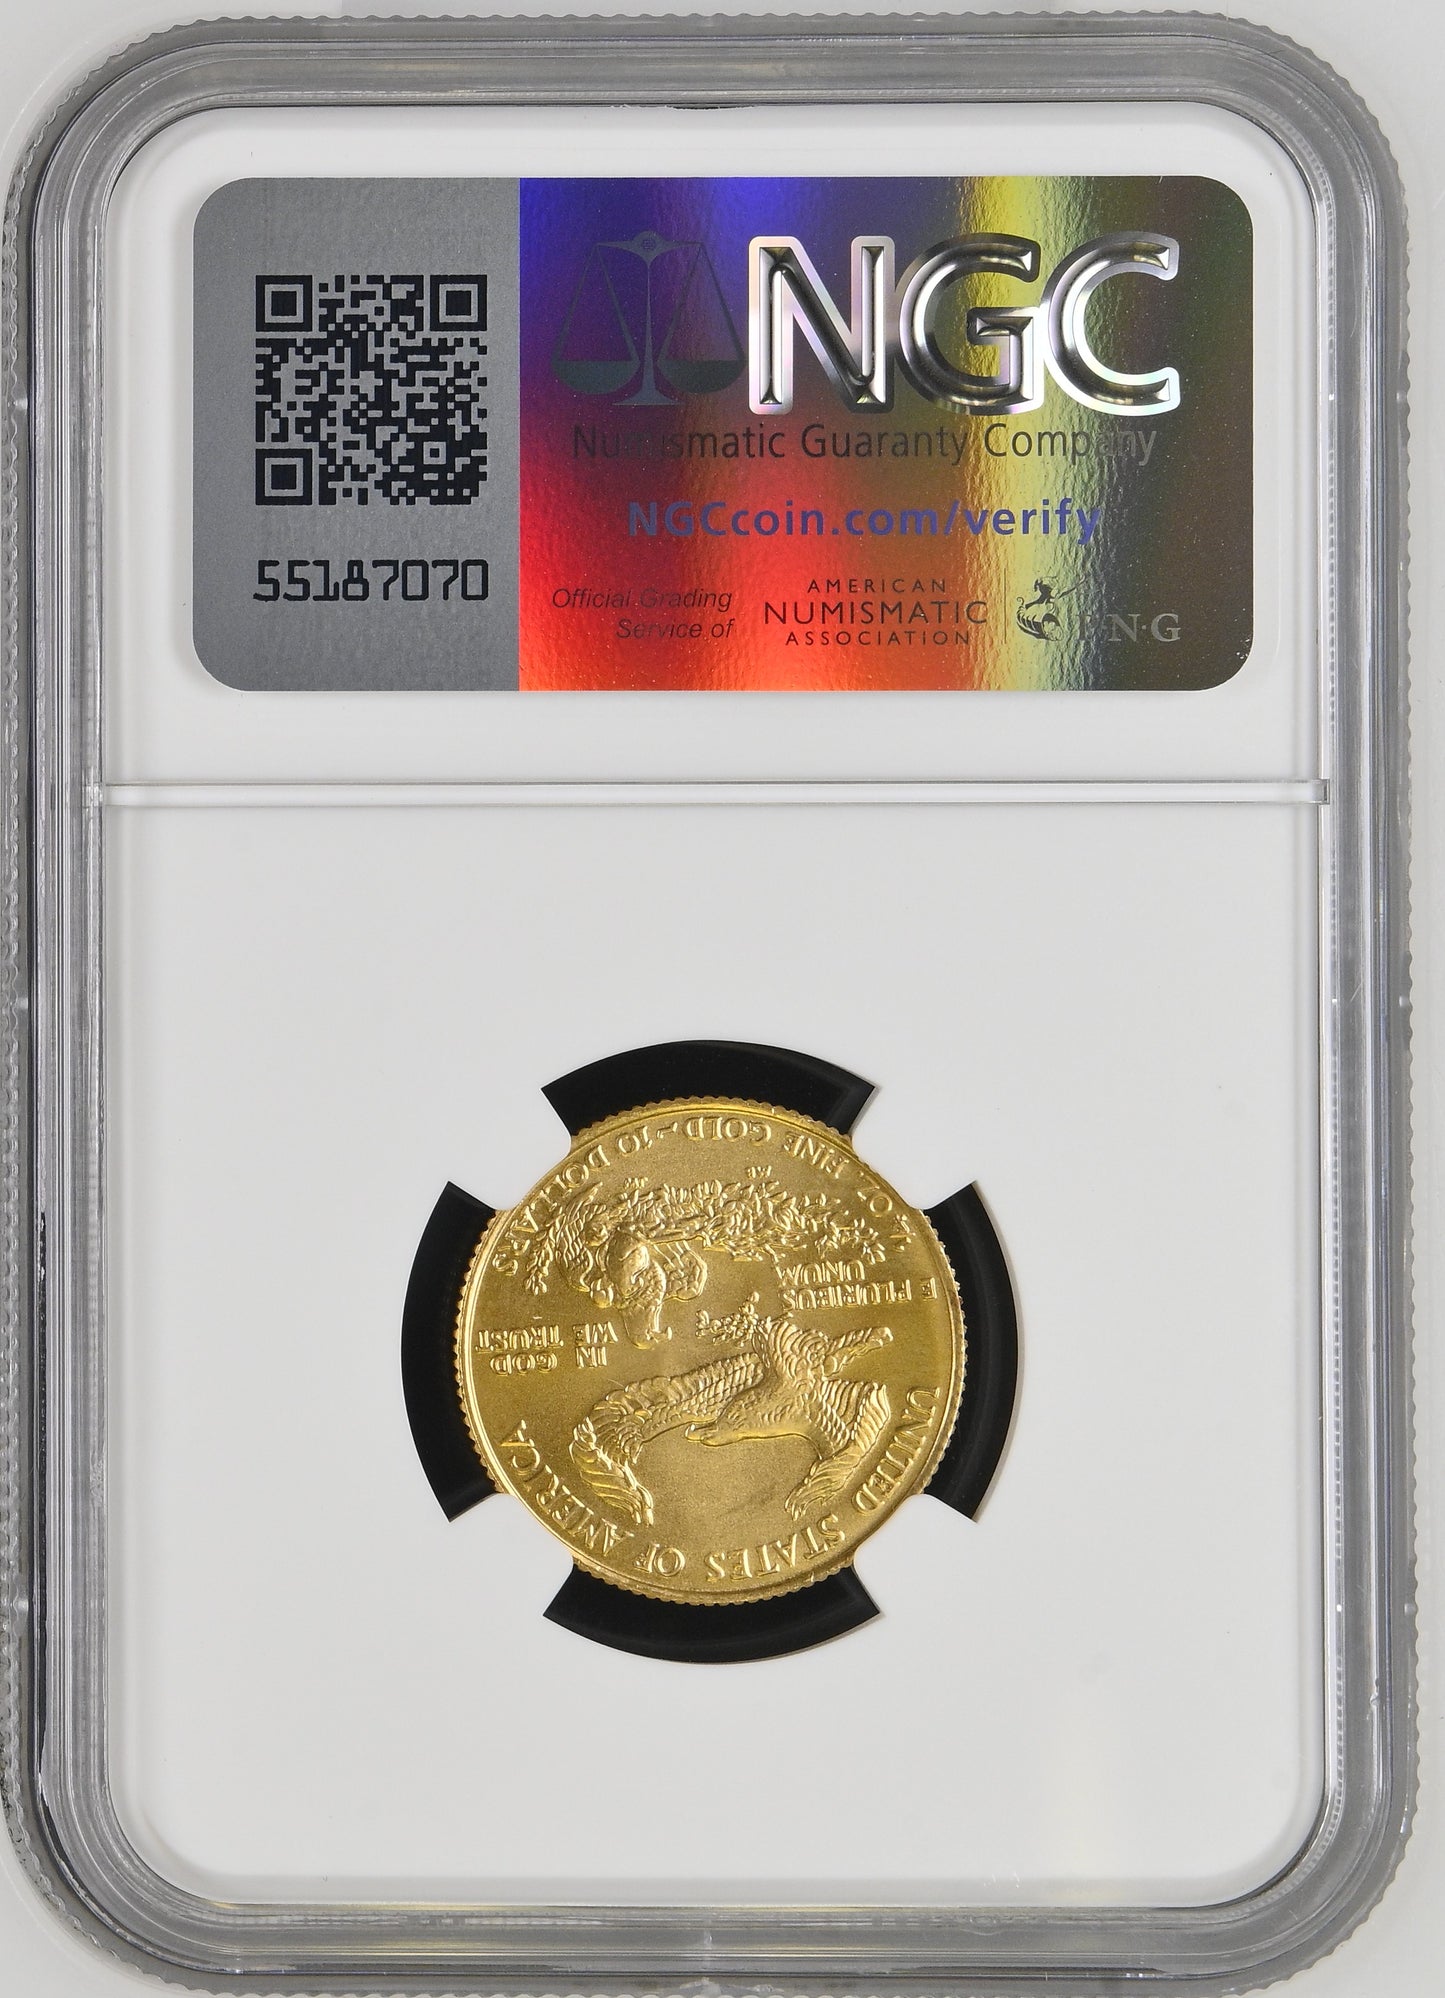 1986 1 oz Gold American Eagle 50$ Bullion Gold Coin - NGC MS 69